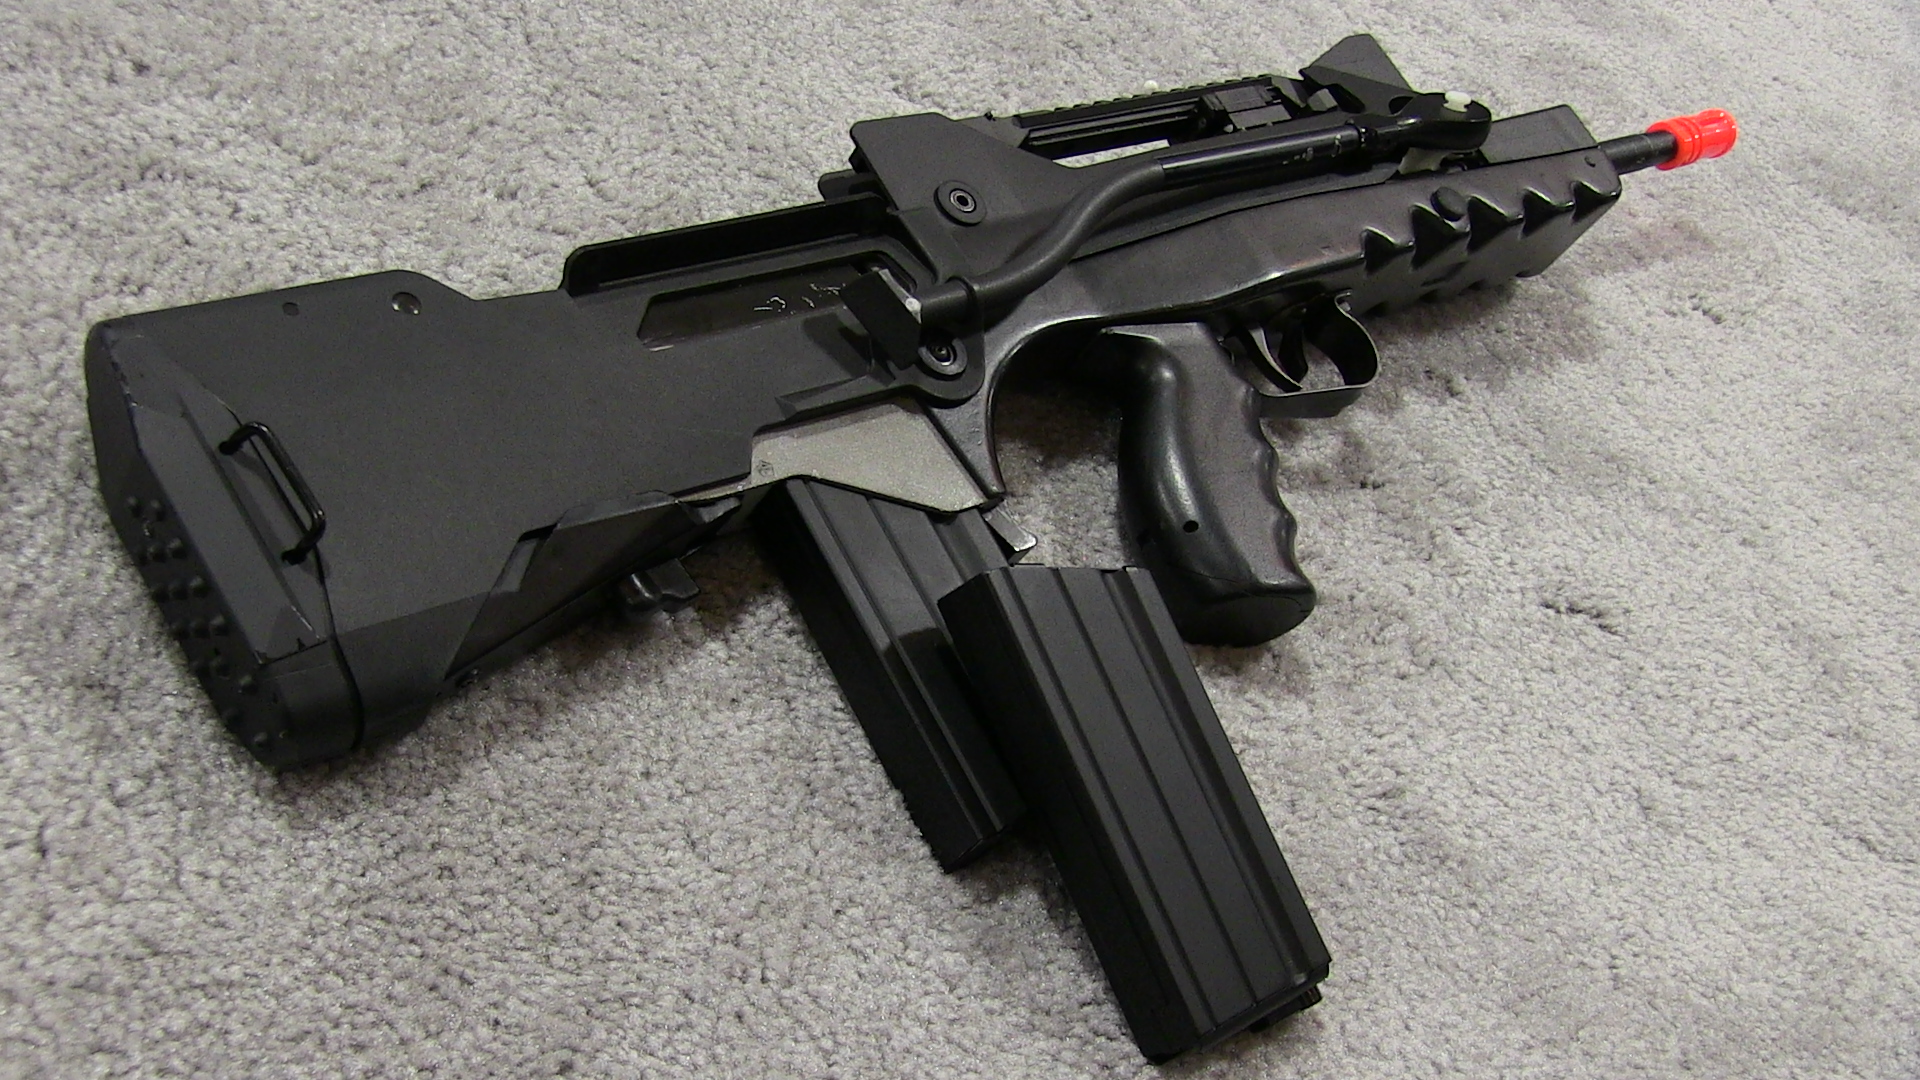 Airsoft Famas by USAirsoft on DeviantArt